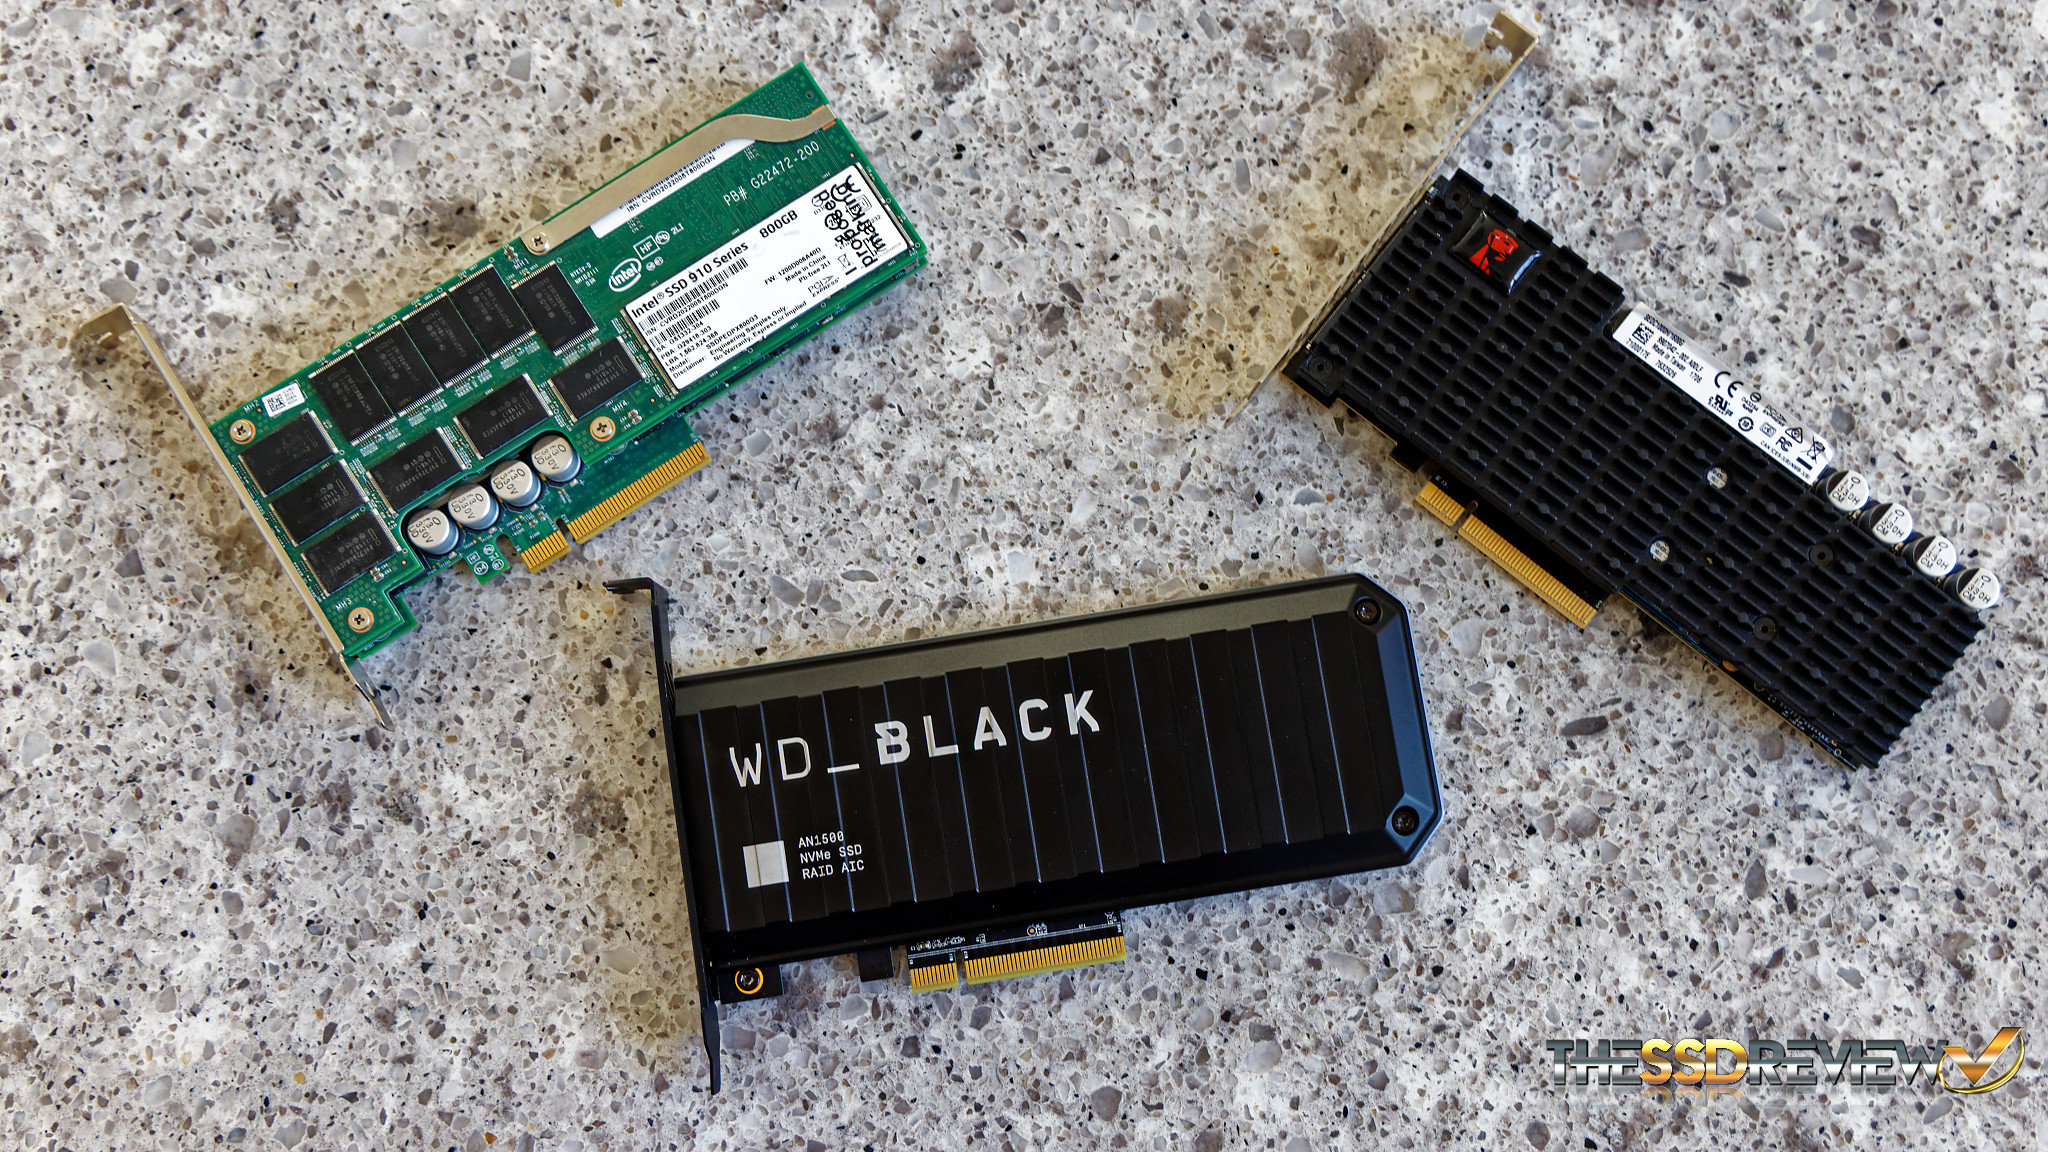 høste Tremble Blive kold WD Black AN1500 2TB RGB NVMe SSD RAID Card Review - 6.5GB/s, 5-Year  Warranty and It Boots! | The SSD Review